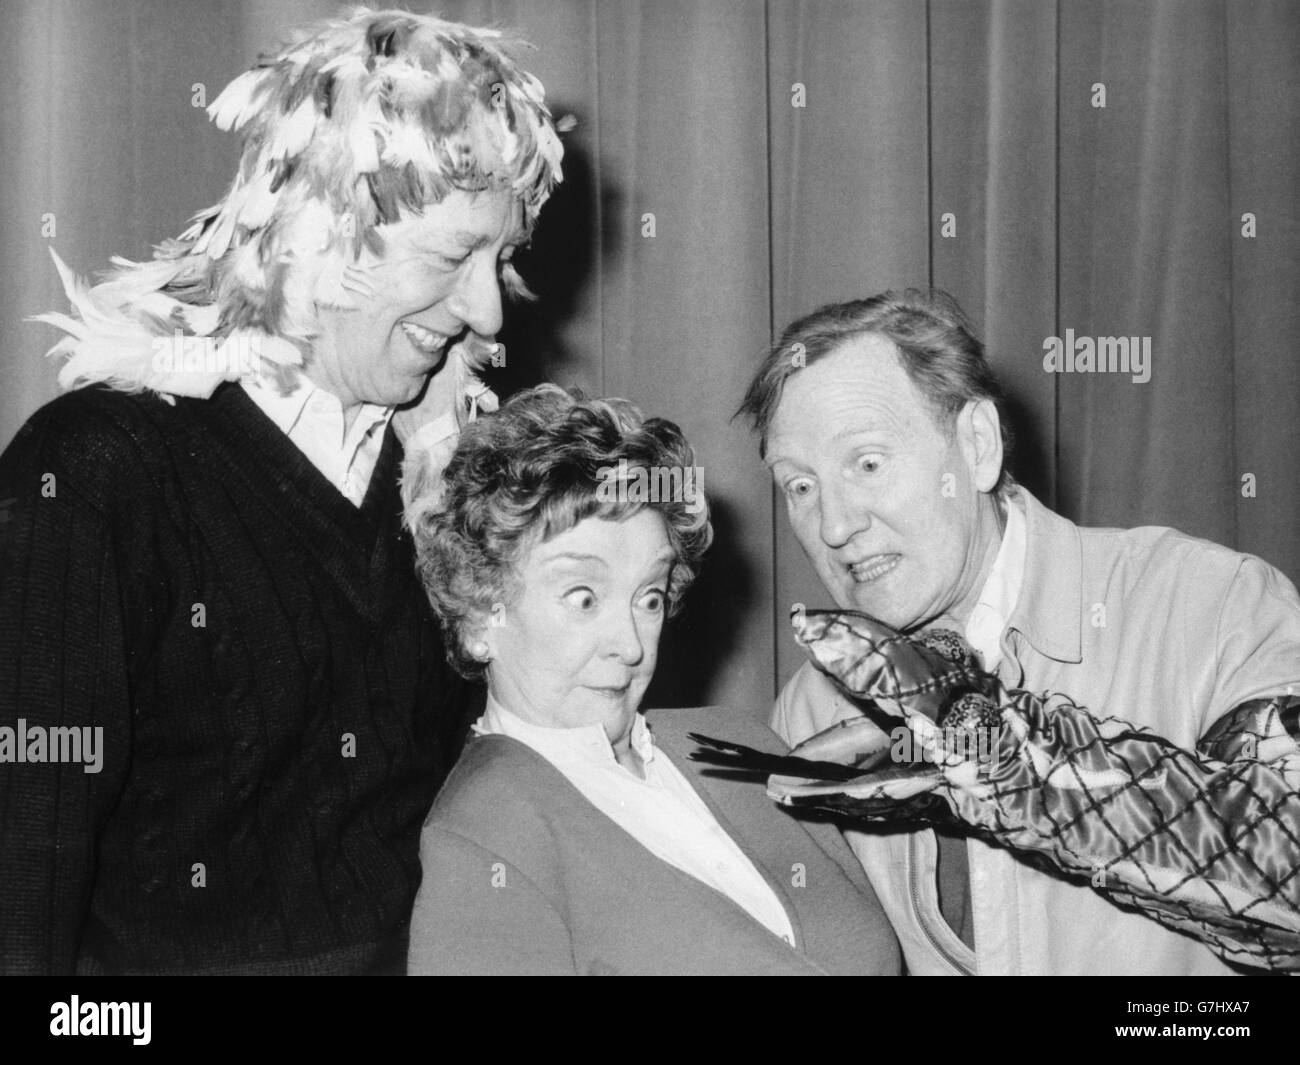 Captain Beaky and his friends preach The Woodland Gospels in a special BBC Radio 4 Christmas adaptation of actor Jeremy Lloyd's best-selling book. Jeremy (l) plays Captain Beaky, with Beryl Reid (Batty Bat) and Leslie Phillips (Hissing Sid), in a strong cast. Stock Photo